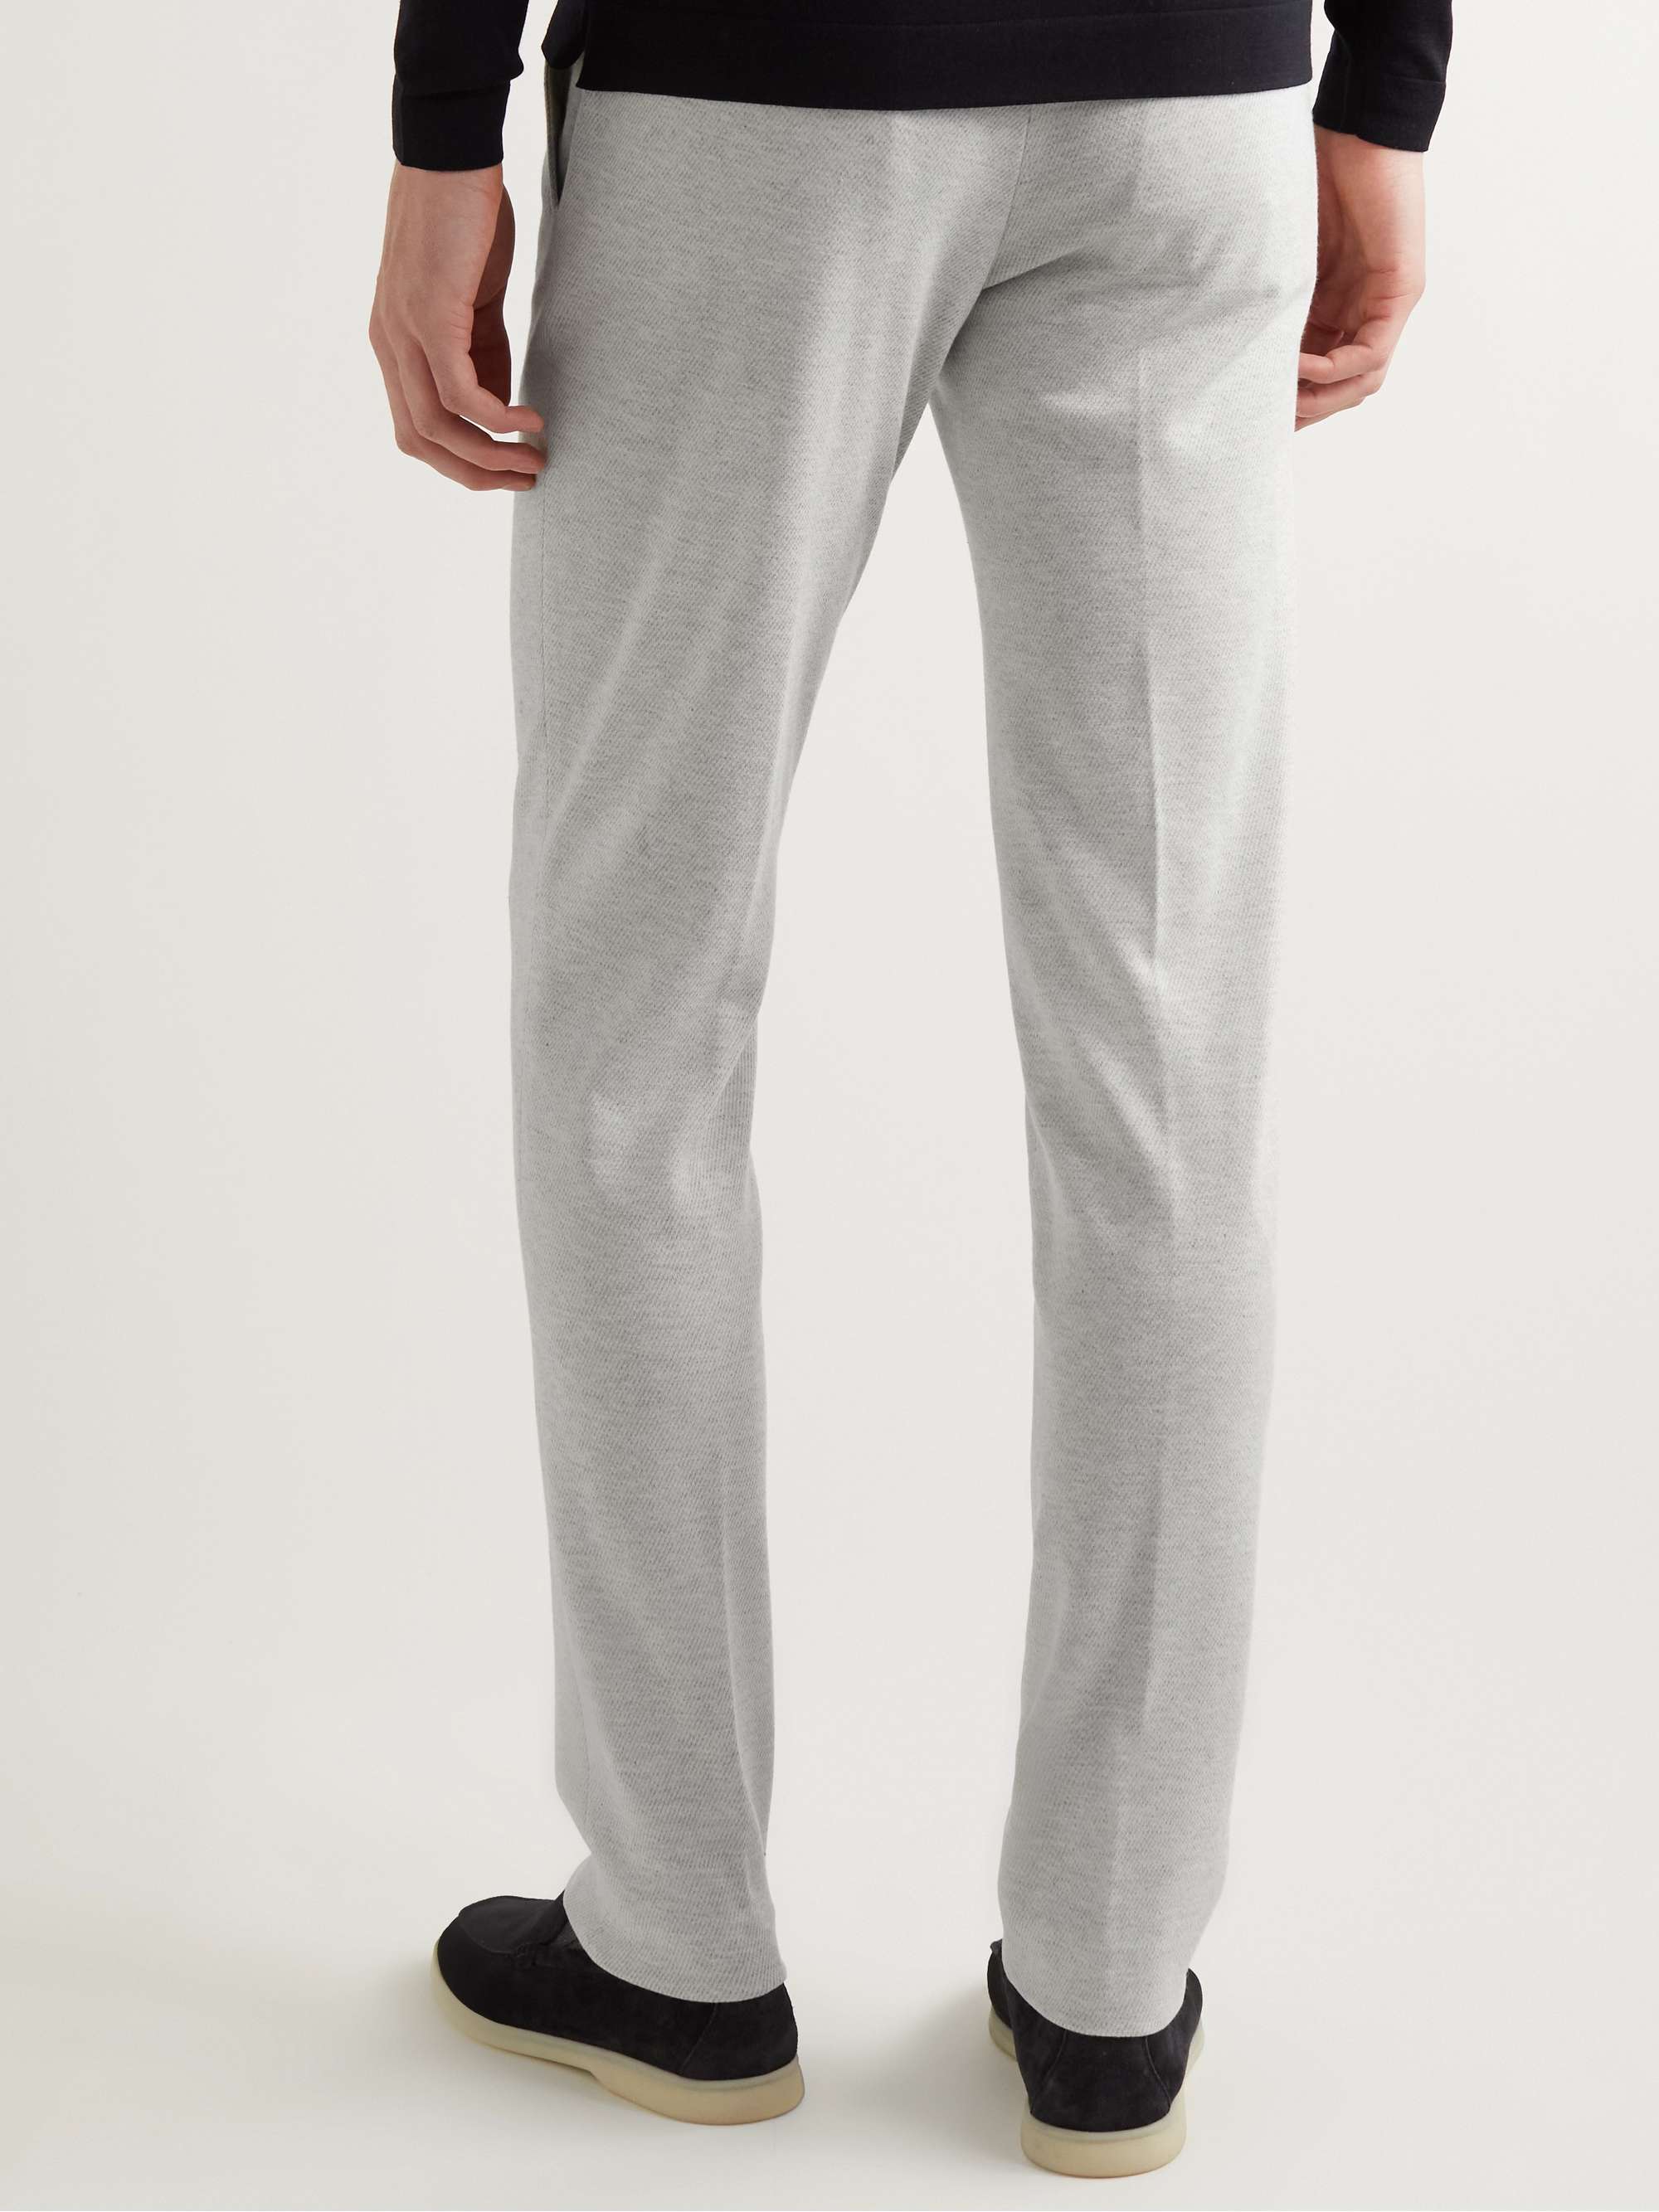 THOM SWEENEY Slim-Fit Tapered Wool and Cotton-Blend Jersey Trousers